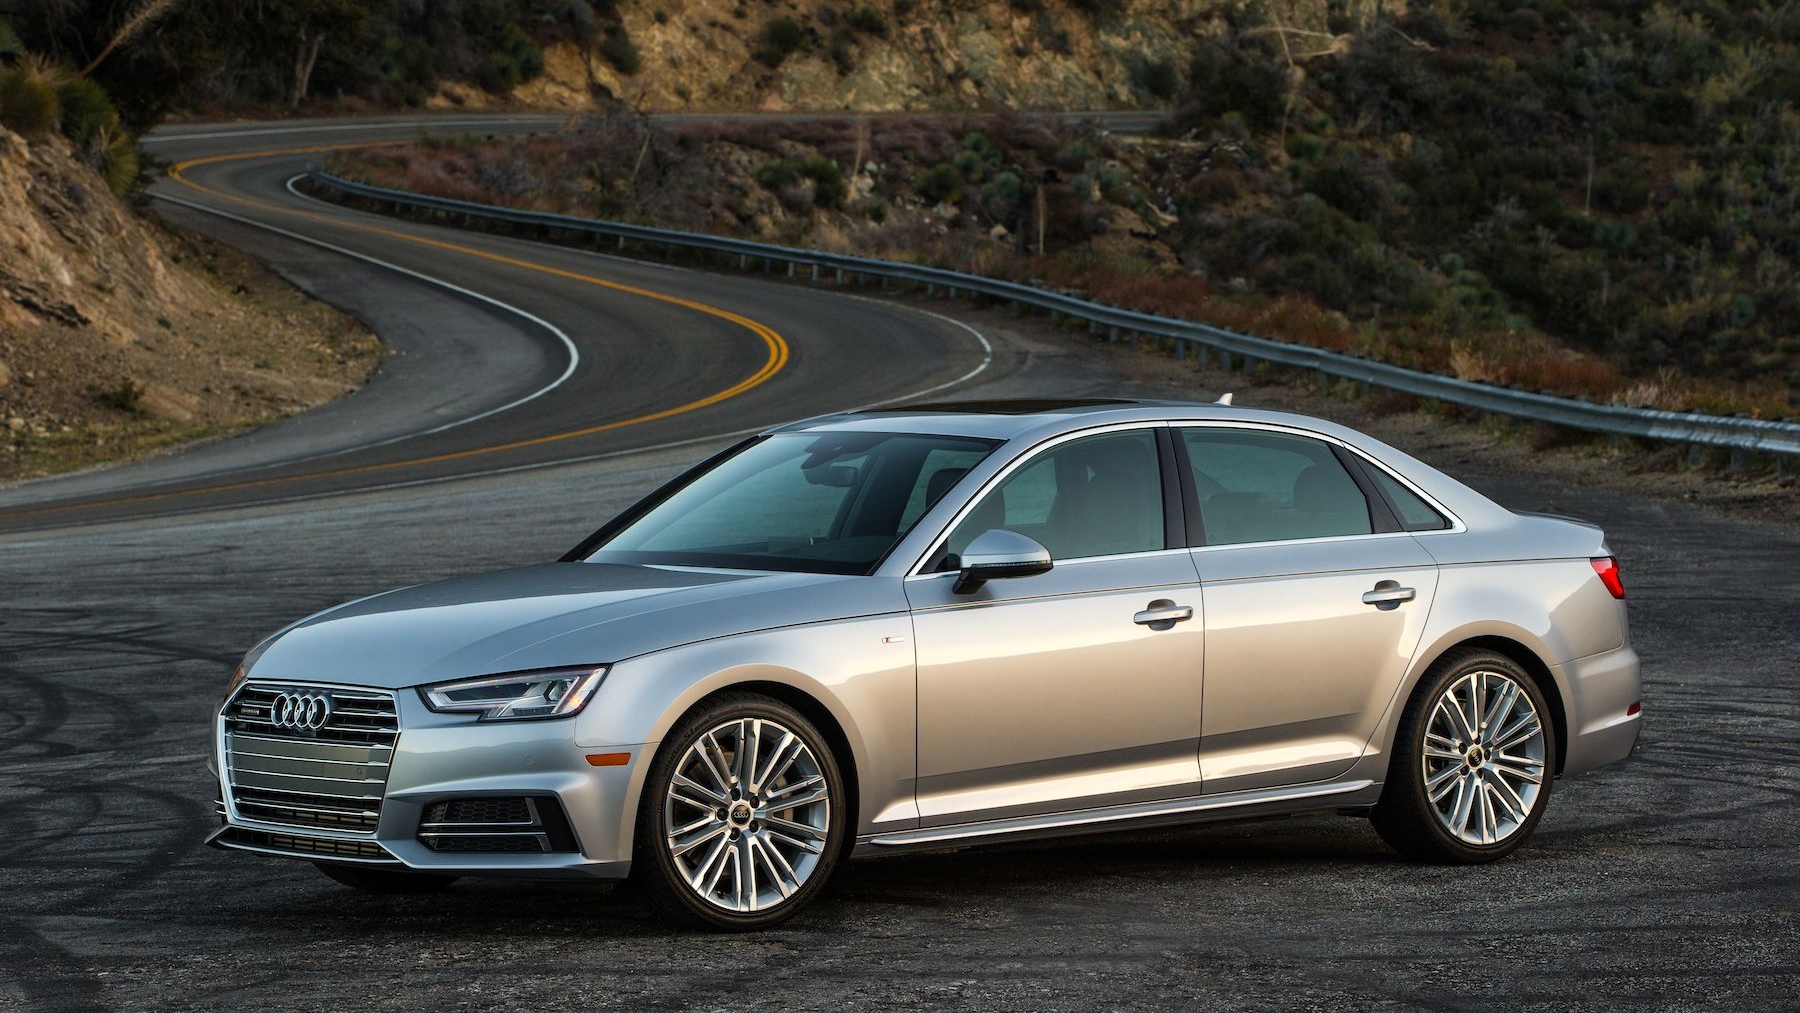 Audi A4 gets new look, more tech and mild hybrid powertrains - CNET